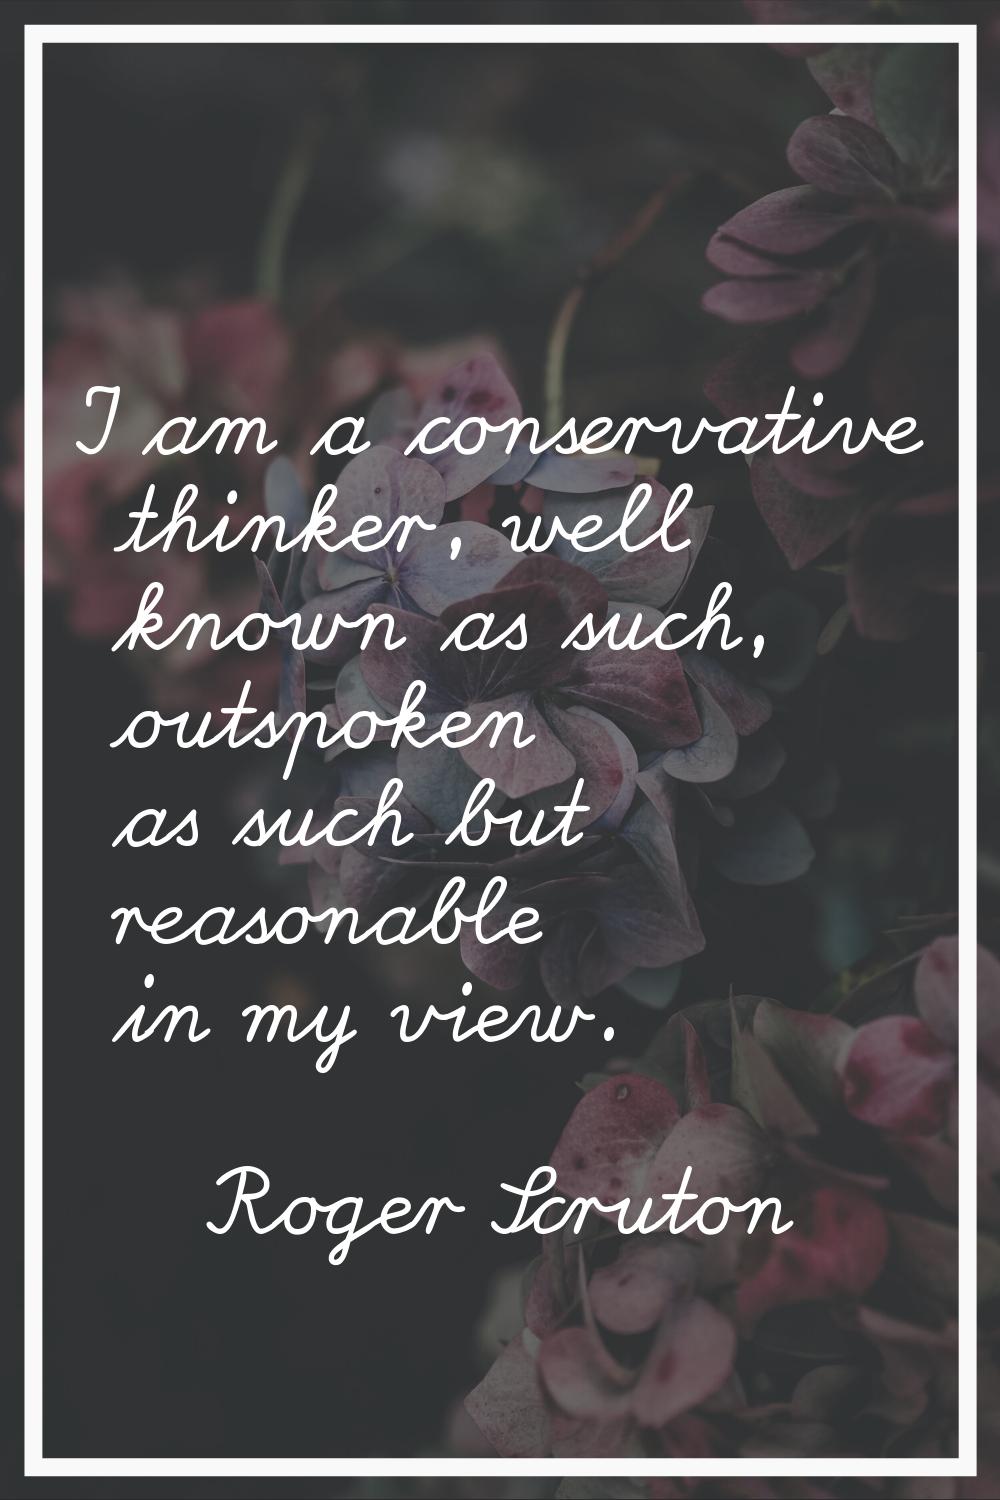 I am a conservative thinker, well known as such, outspoken as such but reasonable in my view.